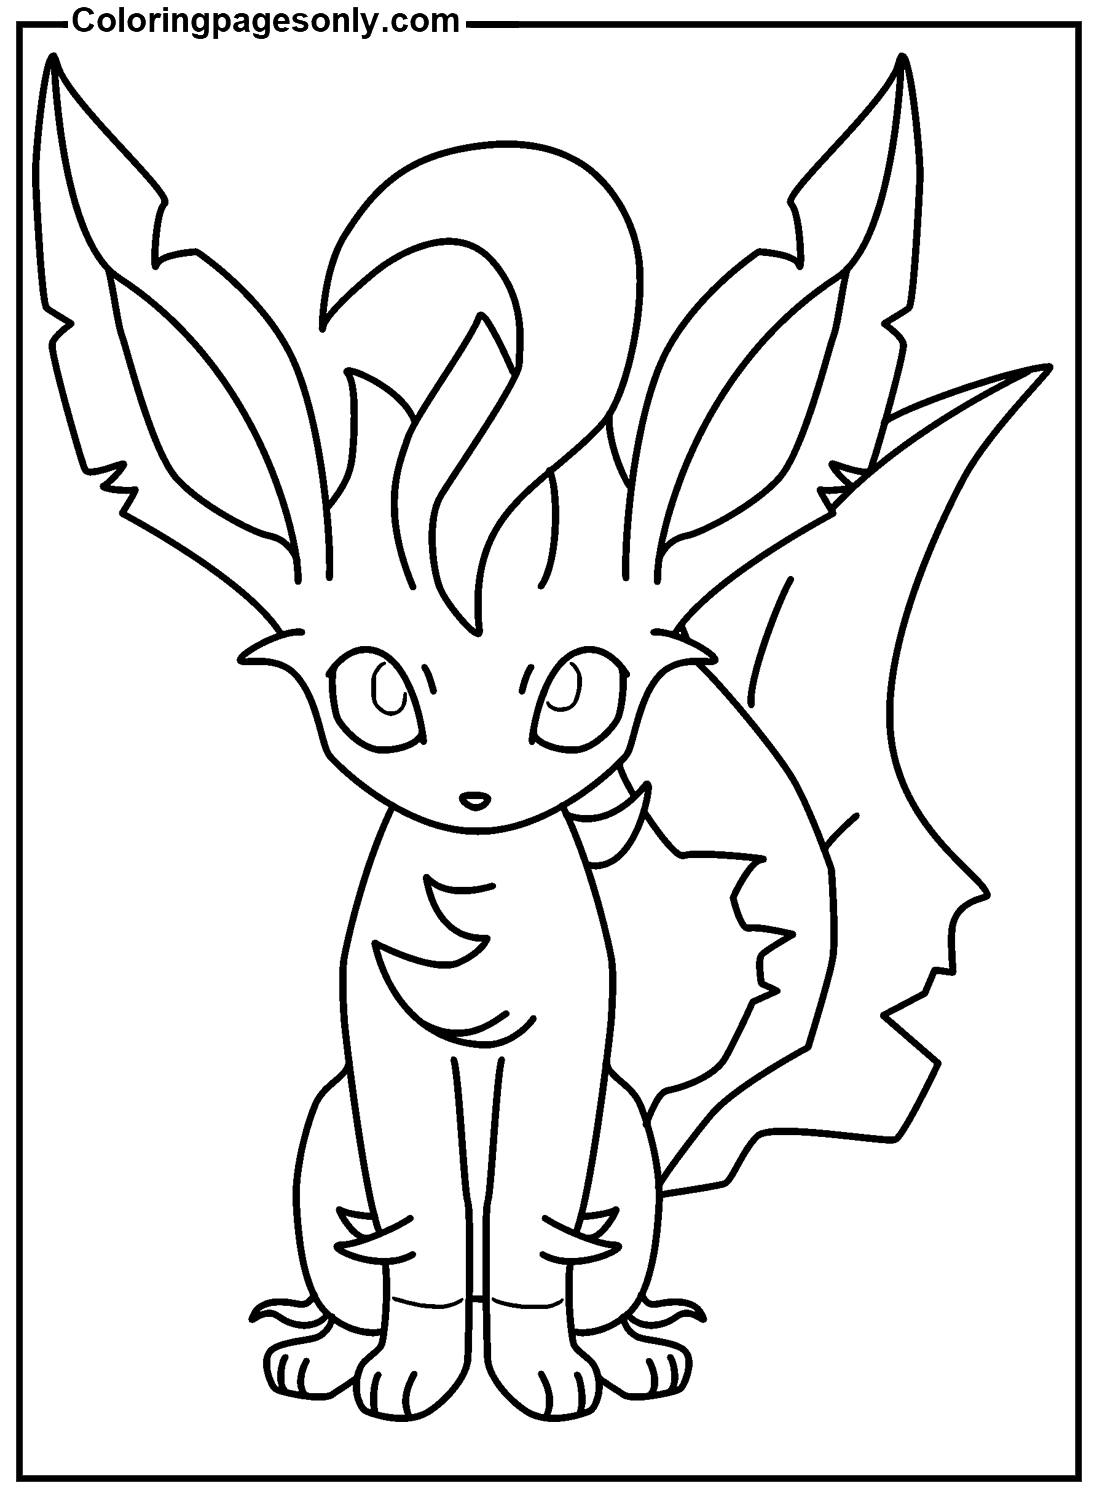 Printable Leafeonn Image from Leafeon